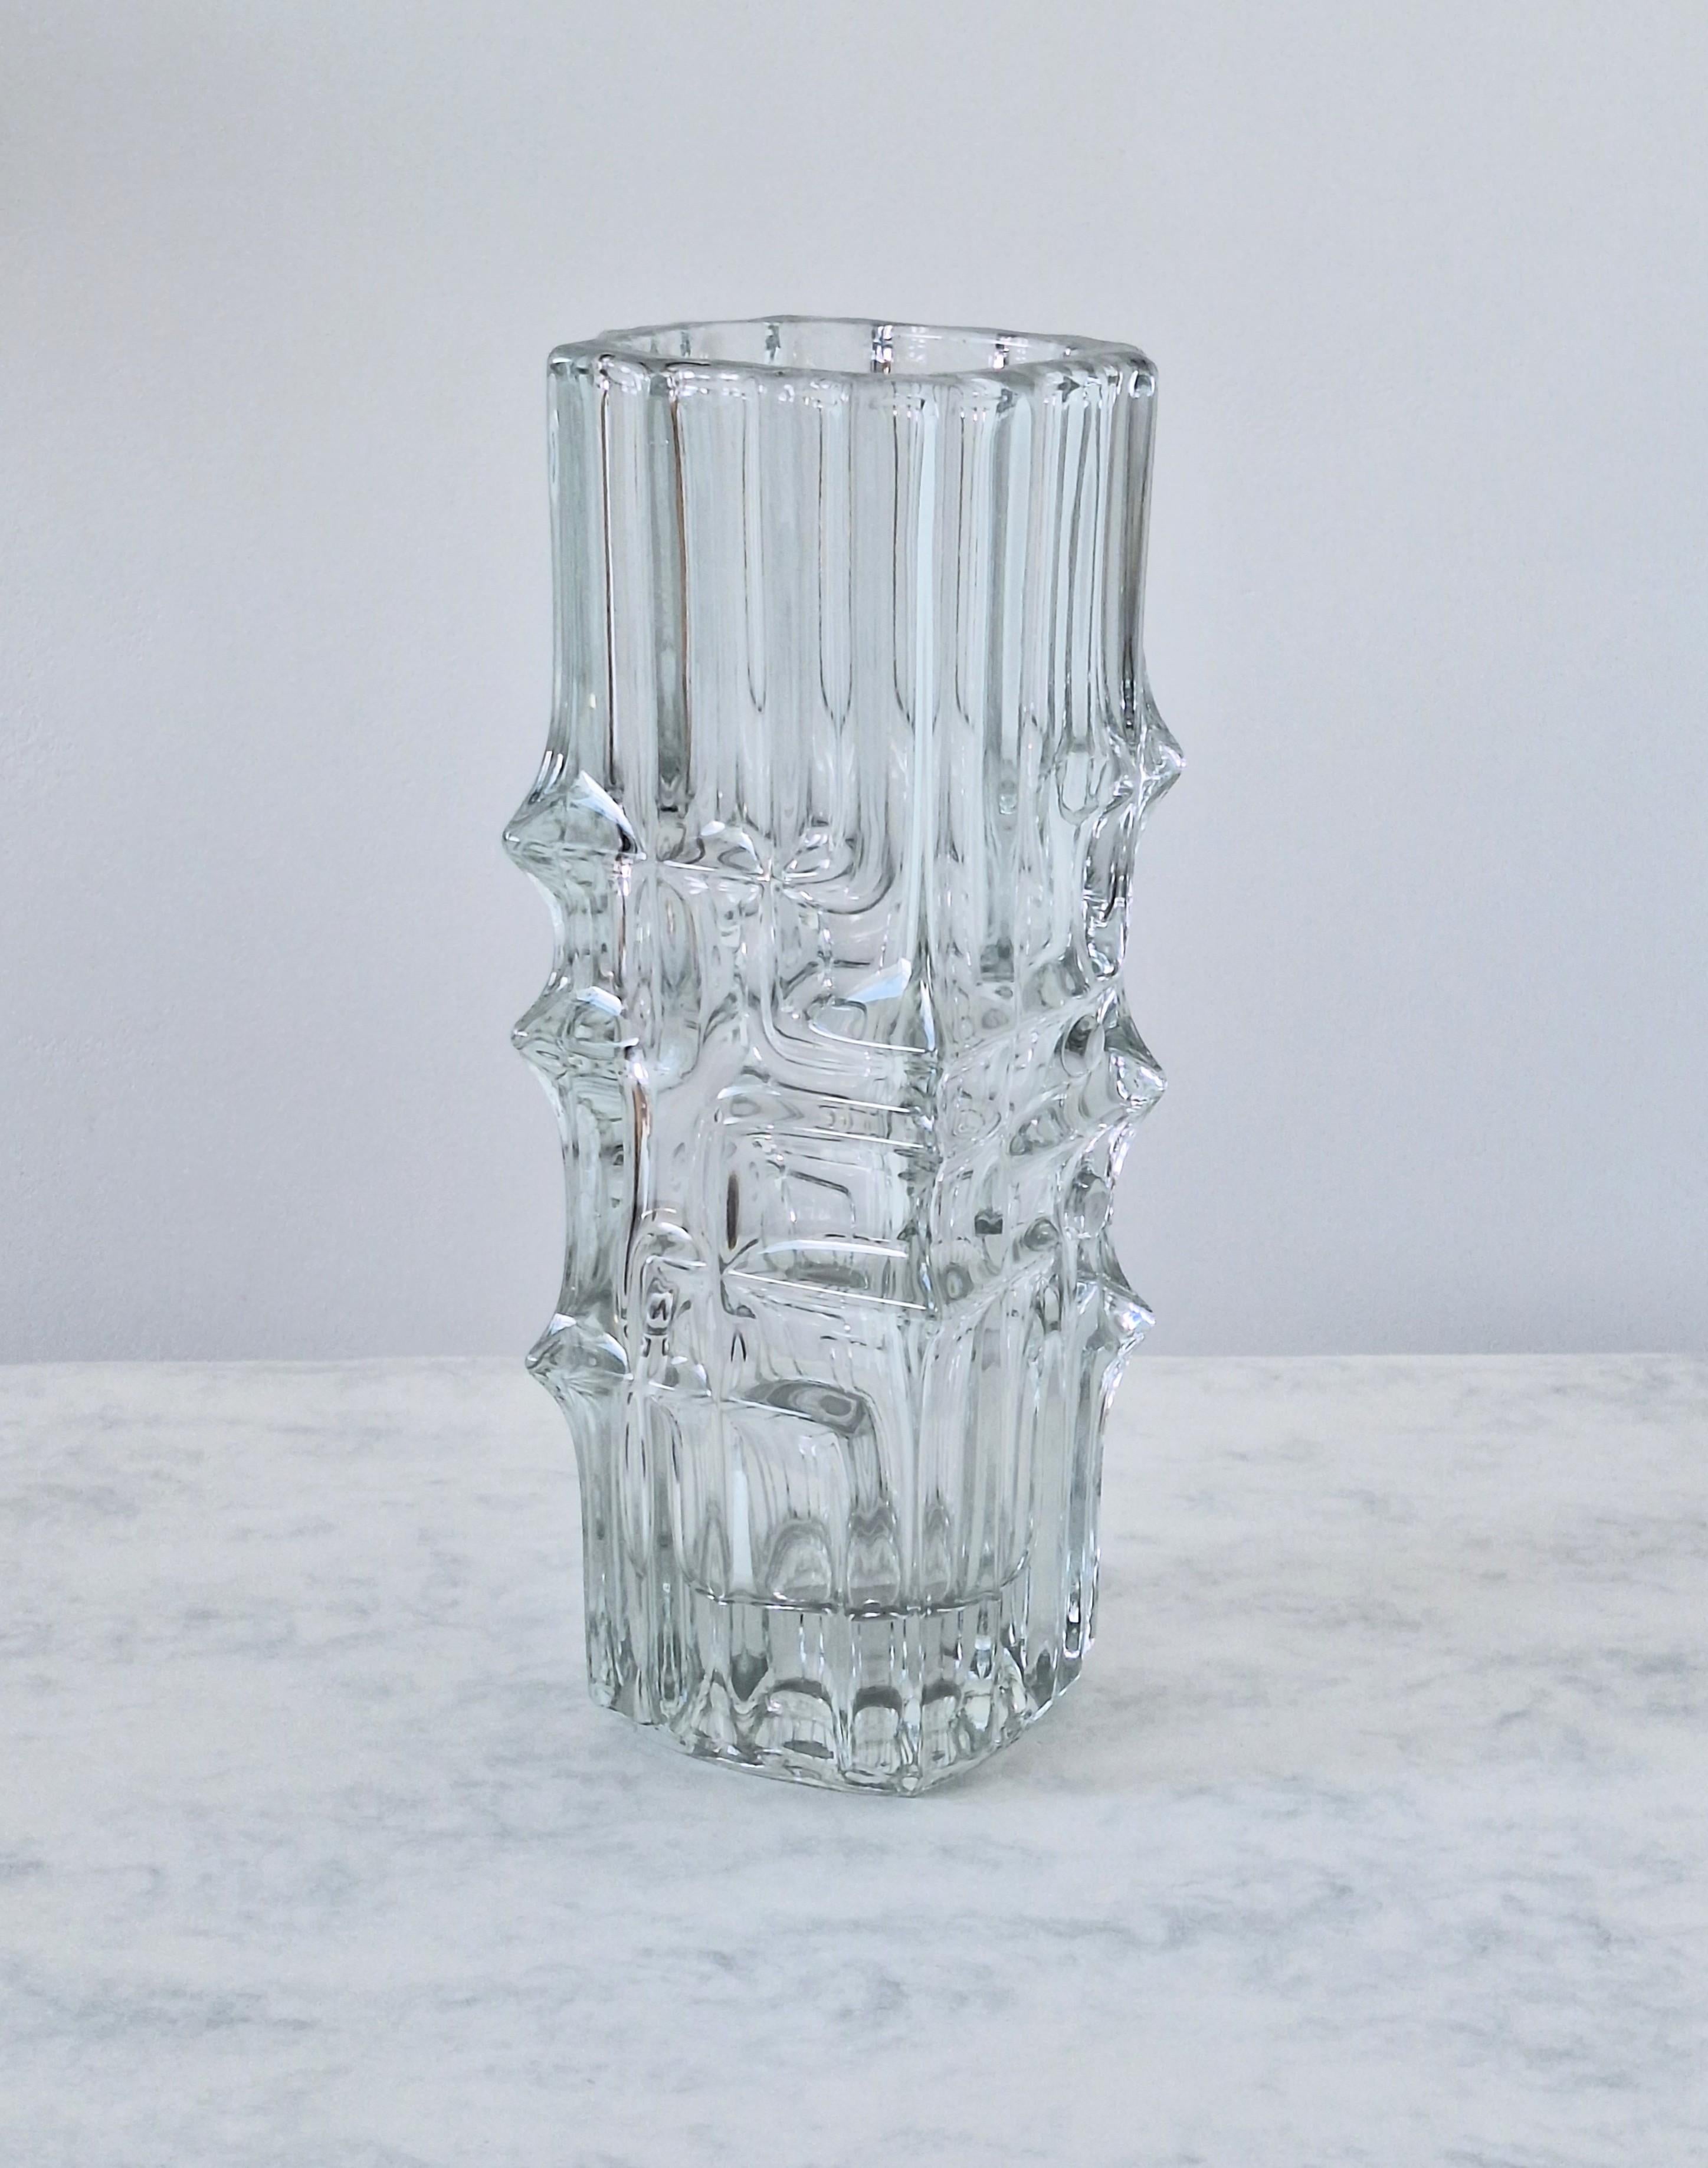 Melting Ice art glass vase by Vladislav Urban for Sklo Union Rosice, Rudolfova Hut glassworks in Czechoslovakia - part of the Sklo Union group, Czech Republic 1968 
 
The designers of Sklo Union were inspired by simple geometric forms arranged on